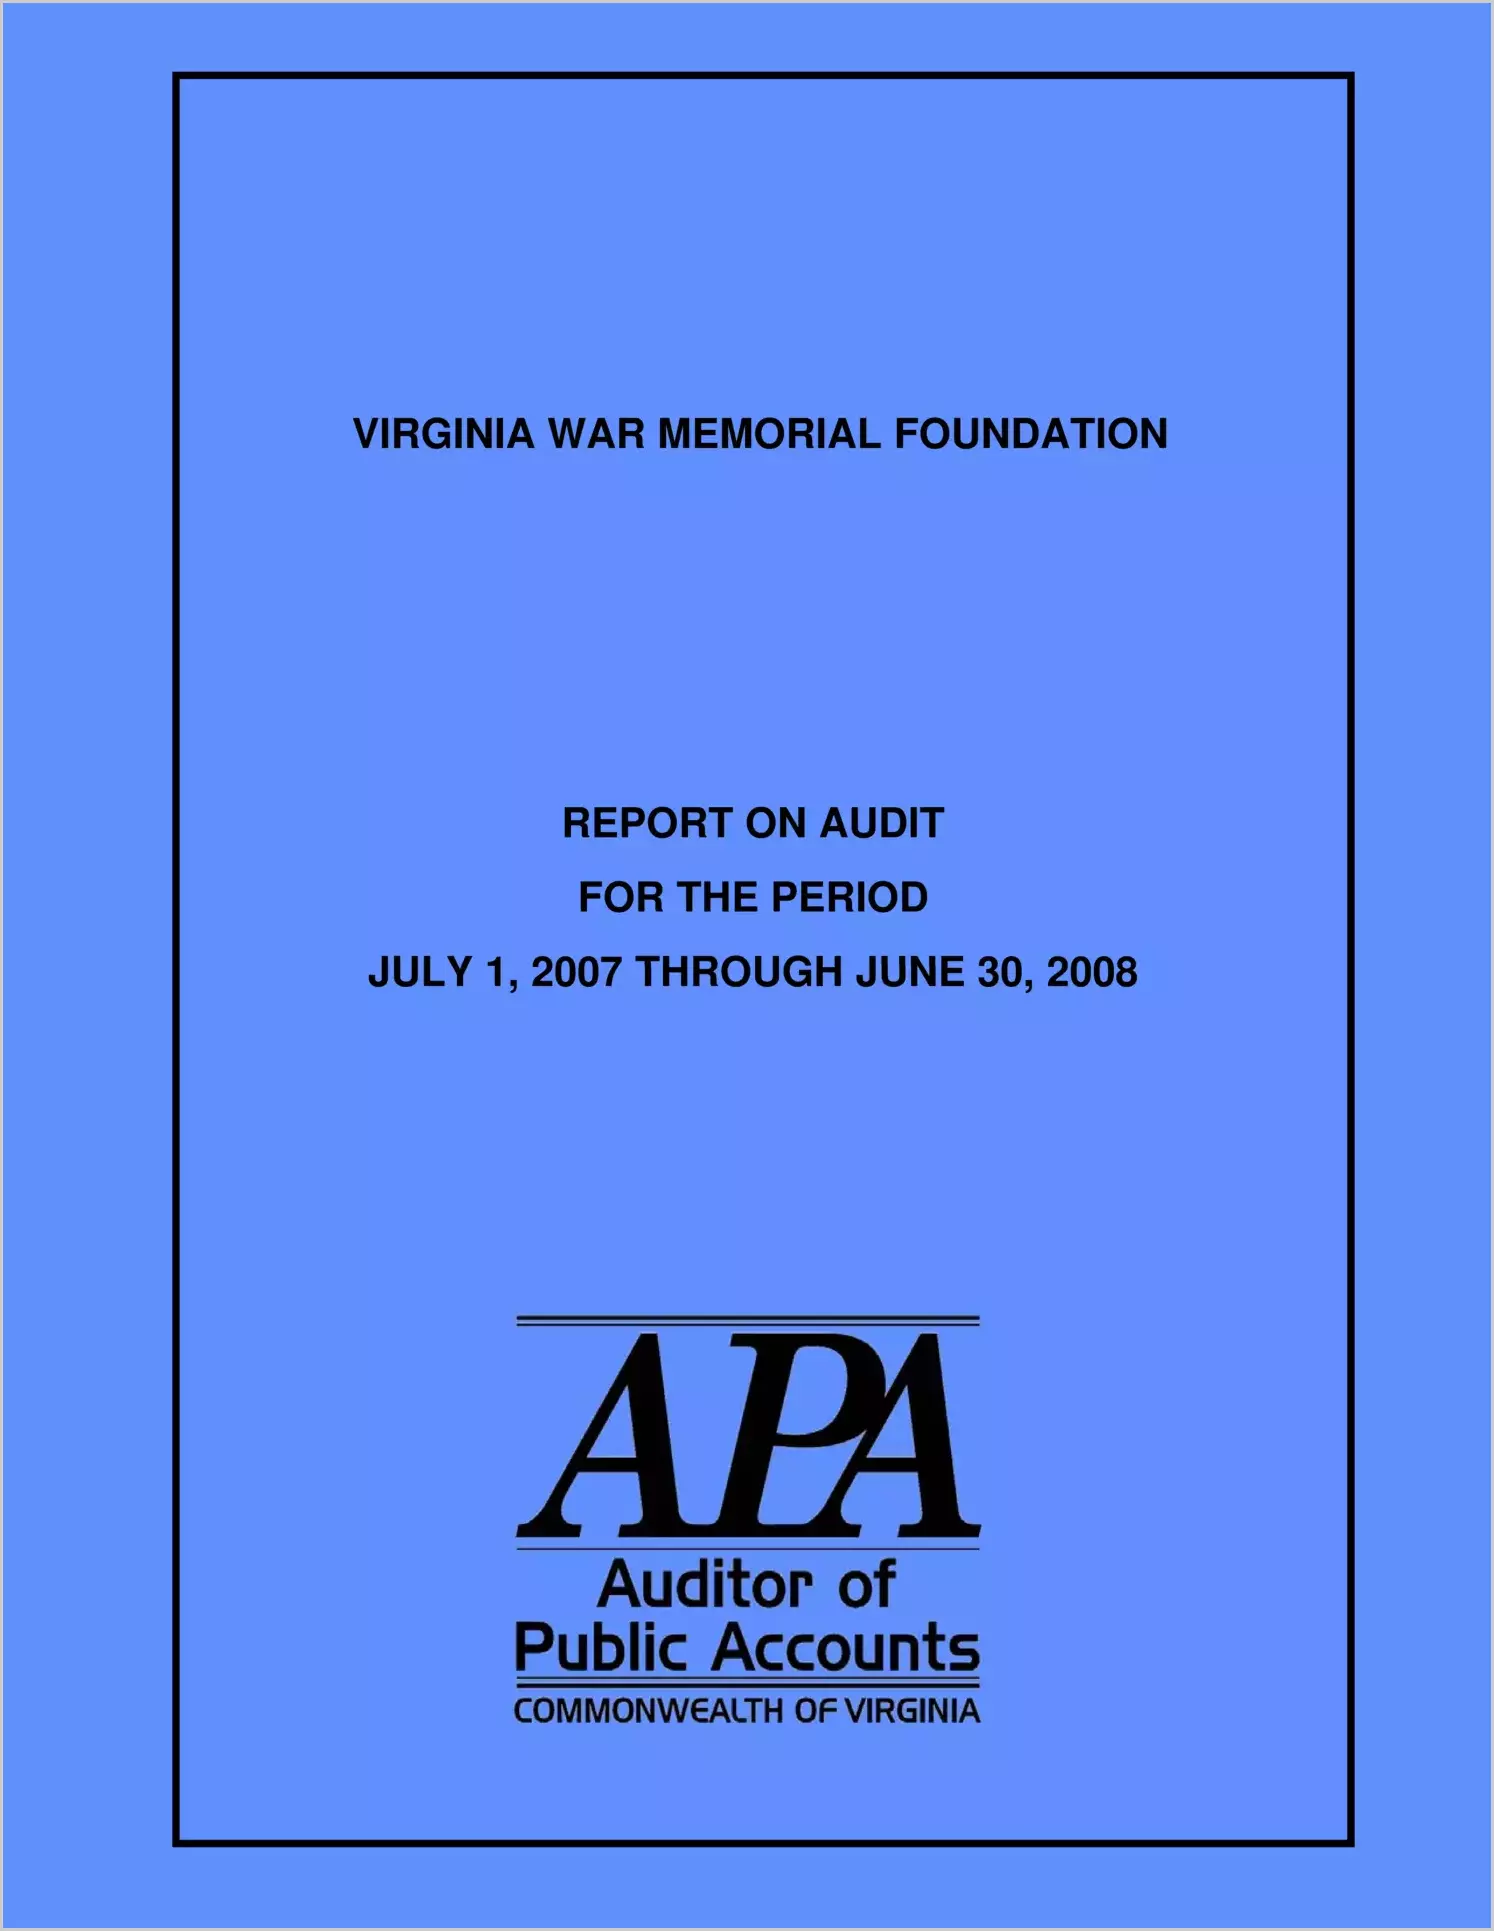 Virginia War Memorial Foundation report on audit for the year ended June 30, 2008